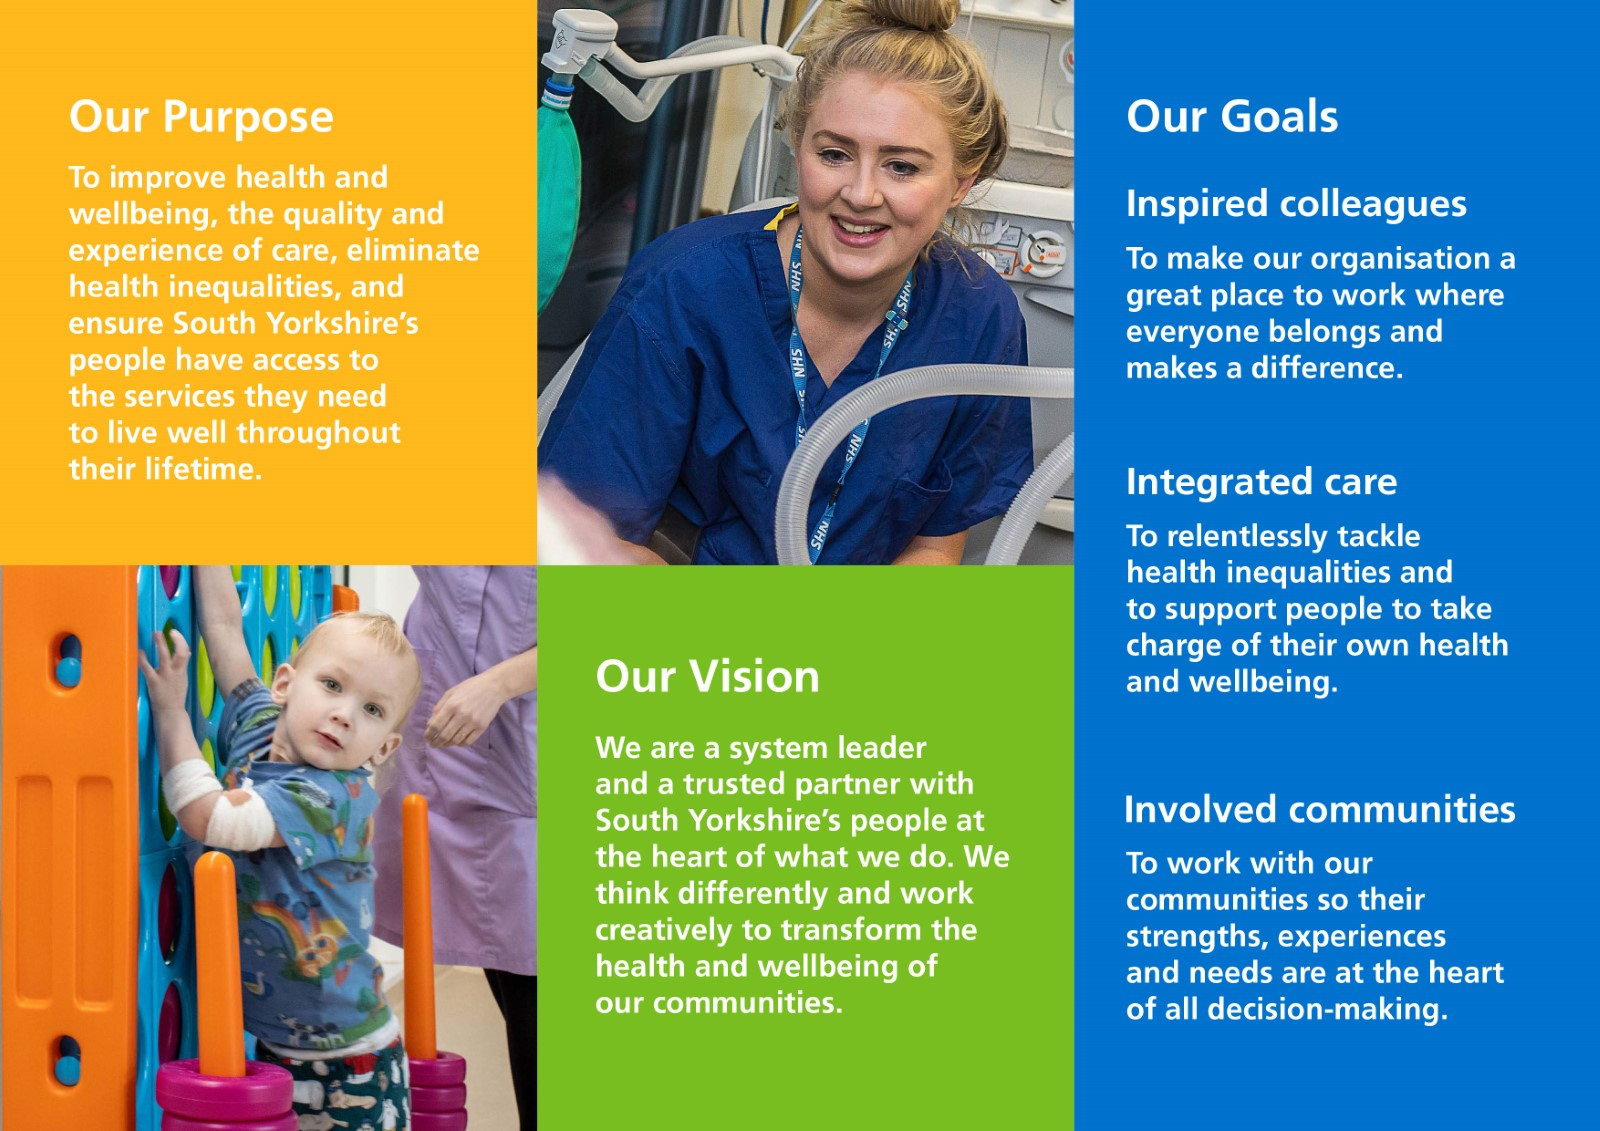 Our purpose is to improve health and wellbeing, the quality and experience of care, eliminate health inequalities and ensure South Yorkshire's people have access to the services they need to live well throughout their lifetime. 